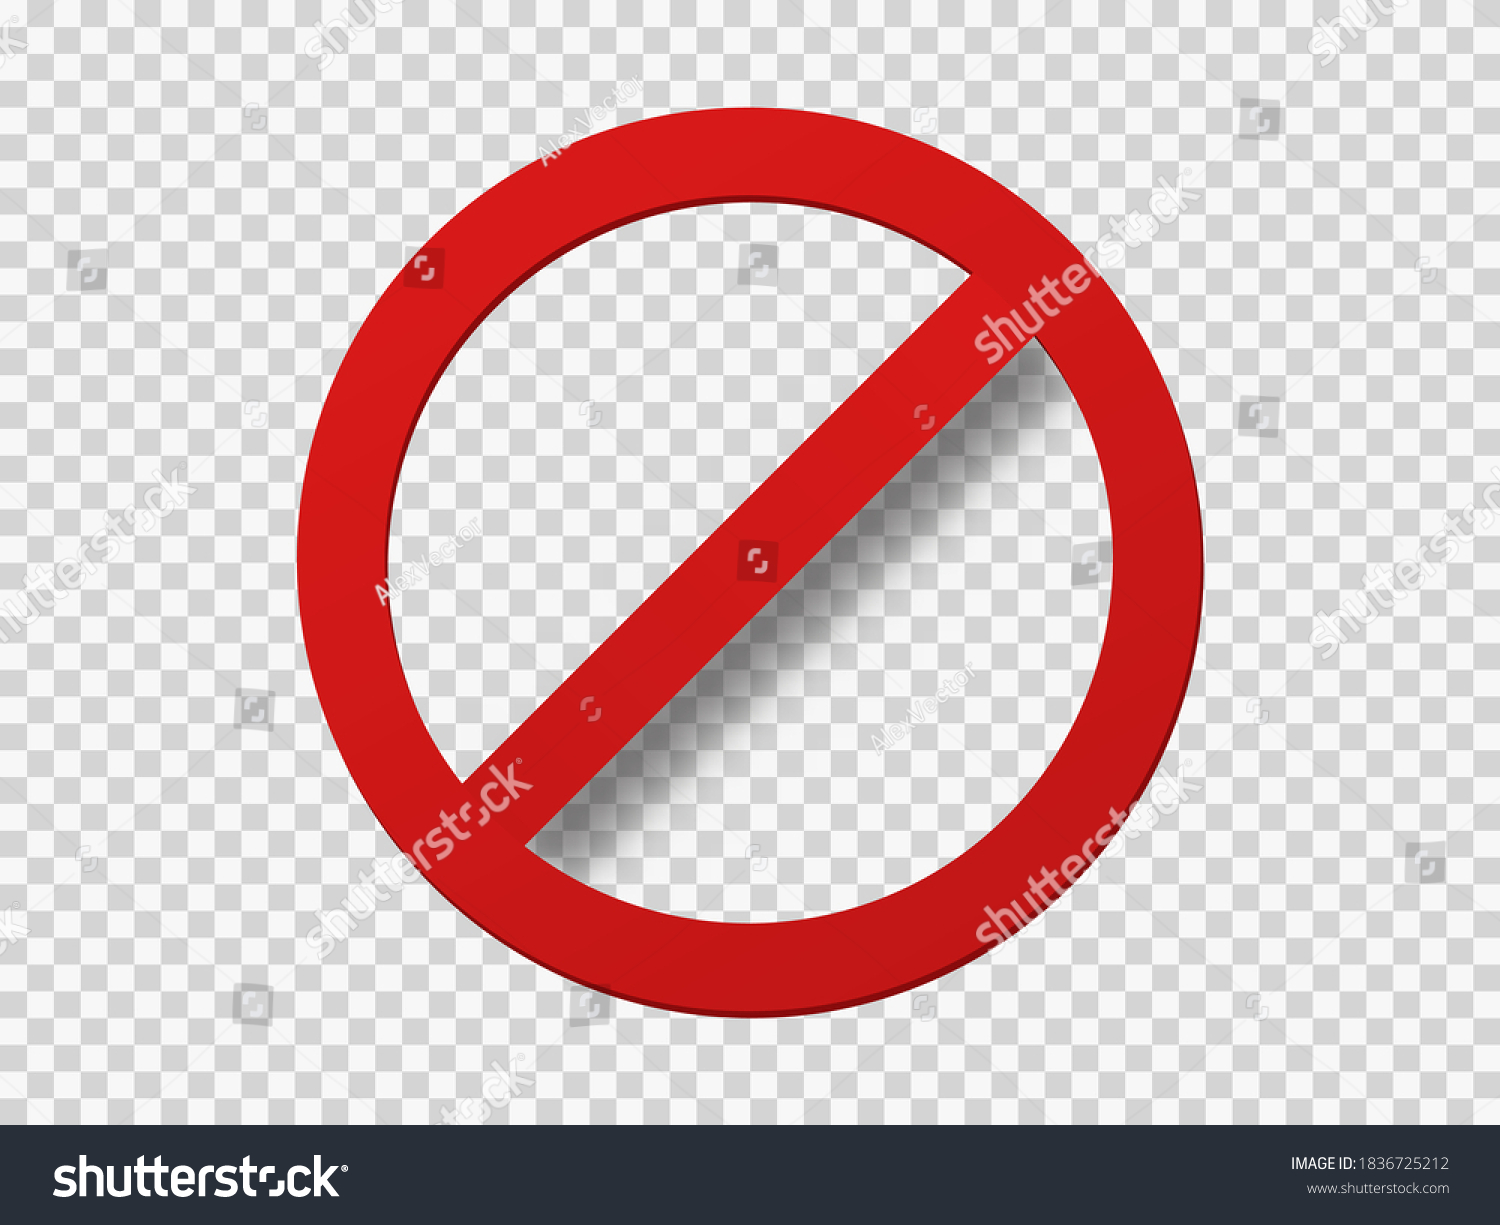 Banned Icon Template Red Circle Crossed Stock Vector Royalty Free 1836725212 Shutterstock